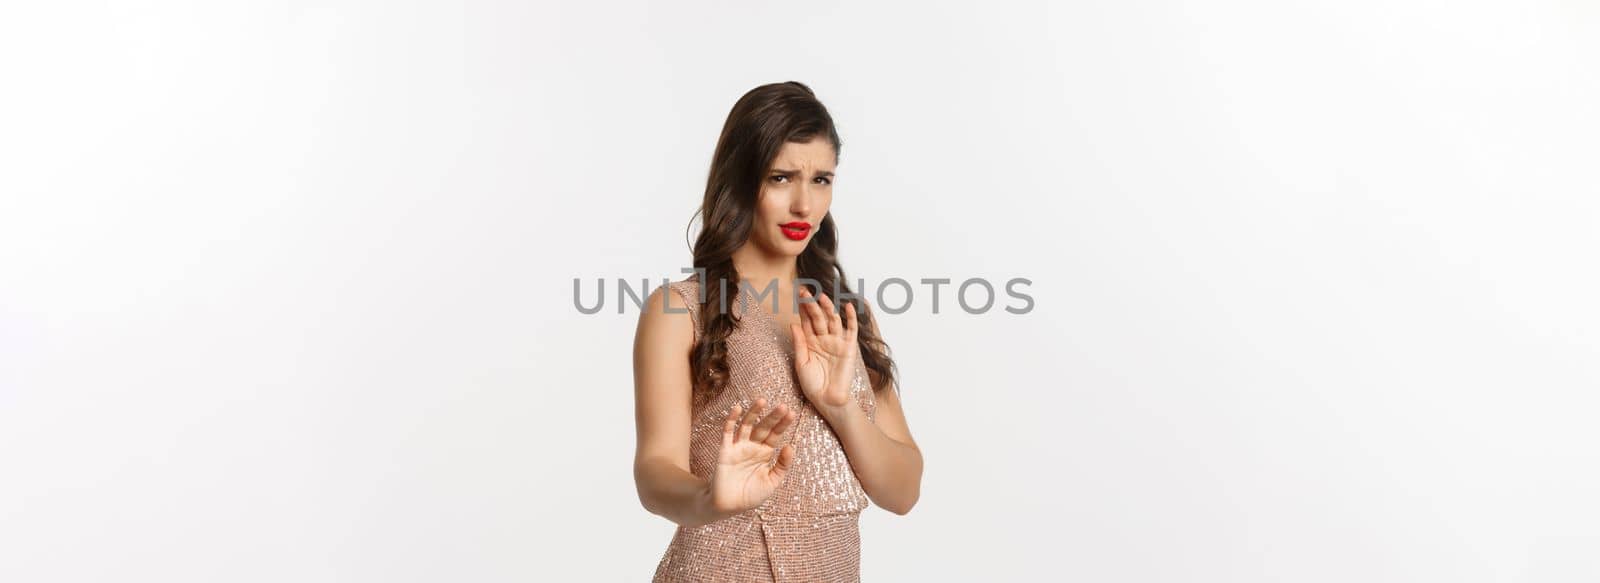 Concept of celebration, holidays and party. Woman looking displeased and rejecting something, wearing glamour dress, showing stop gesture, asking stay away, white background.